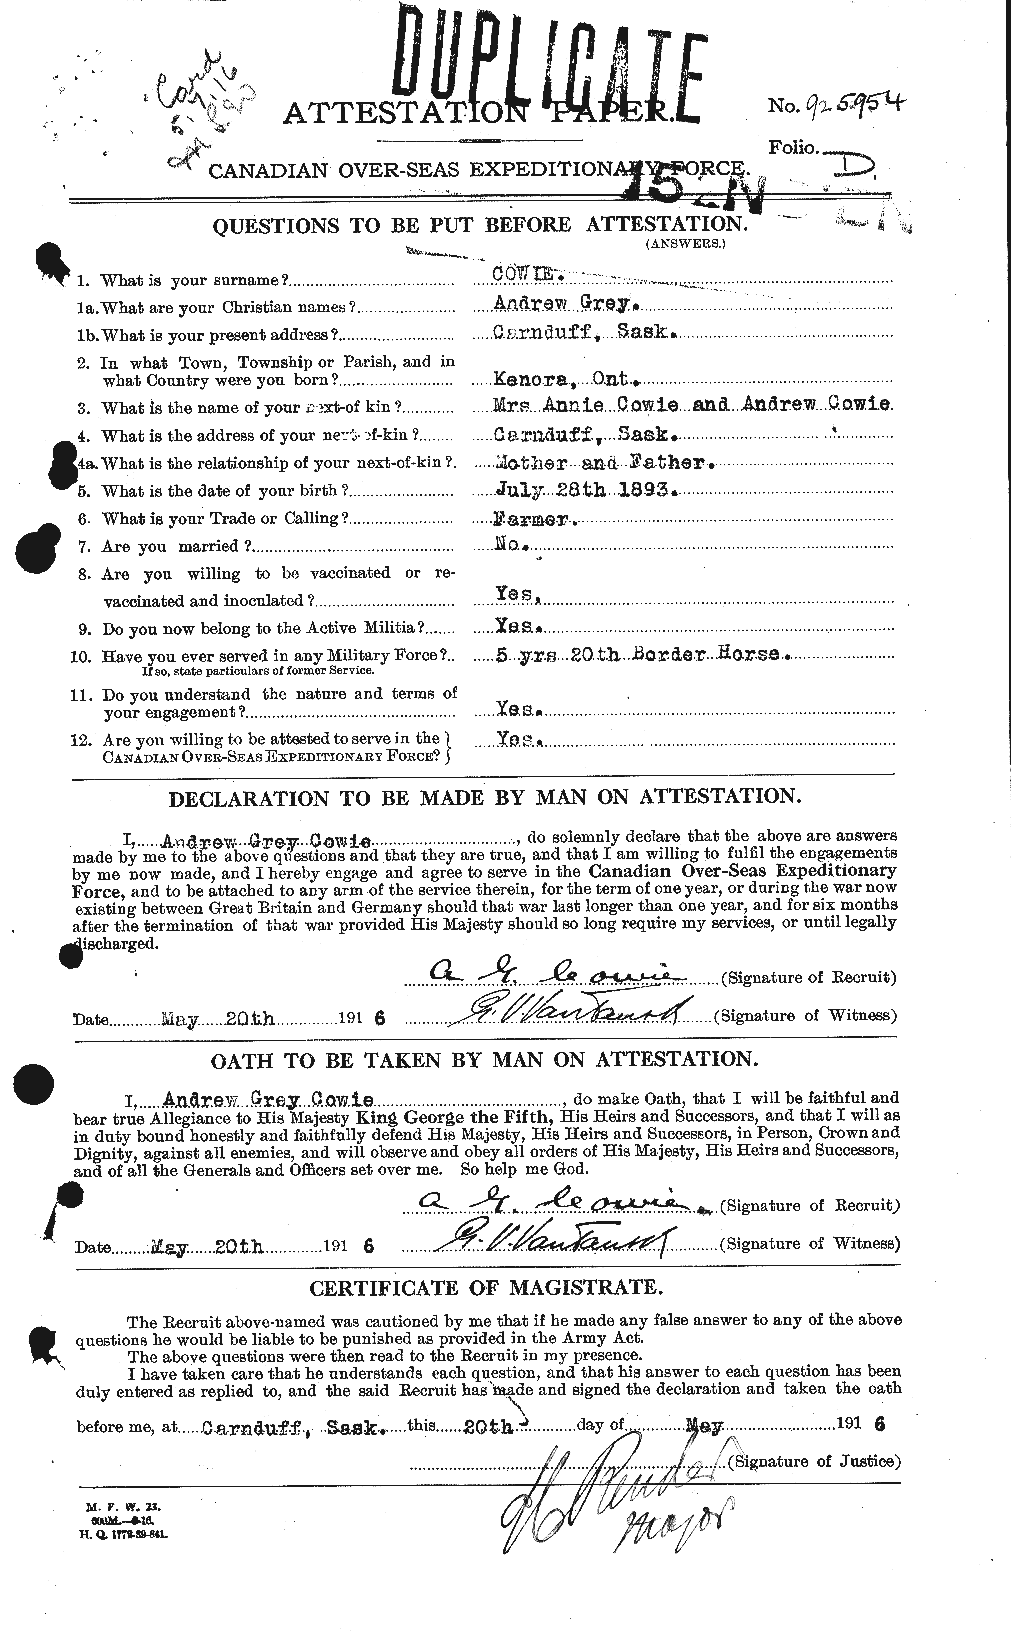 Personnel Records of the First World War - CEF 060036a